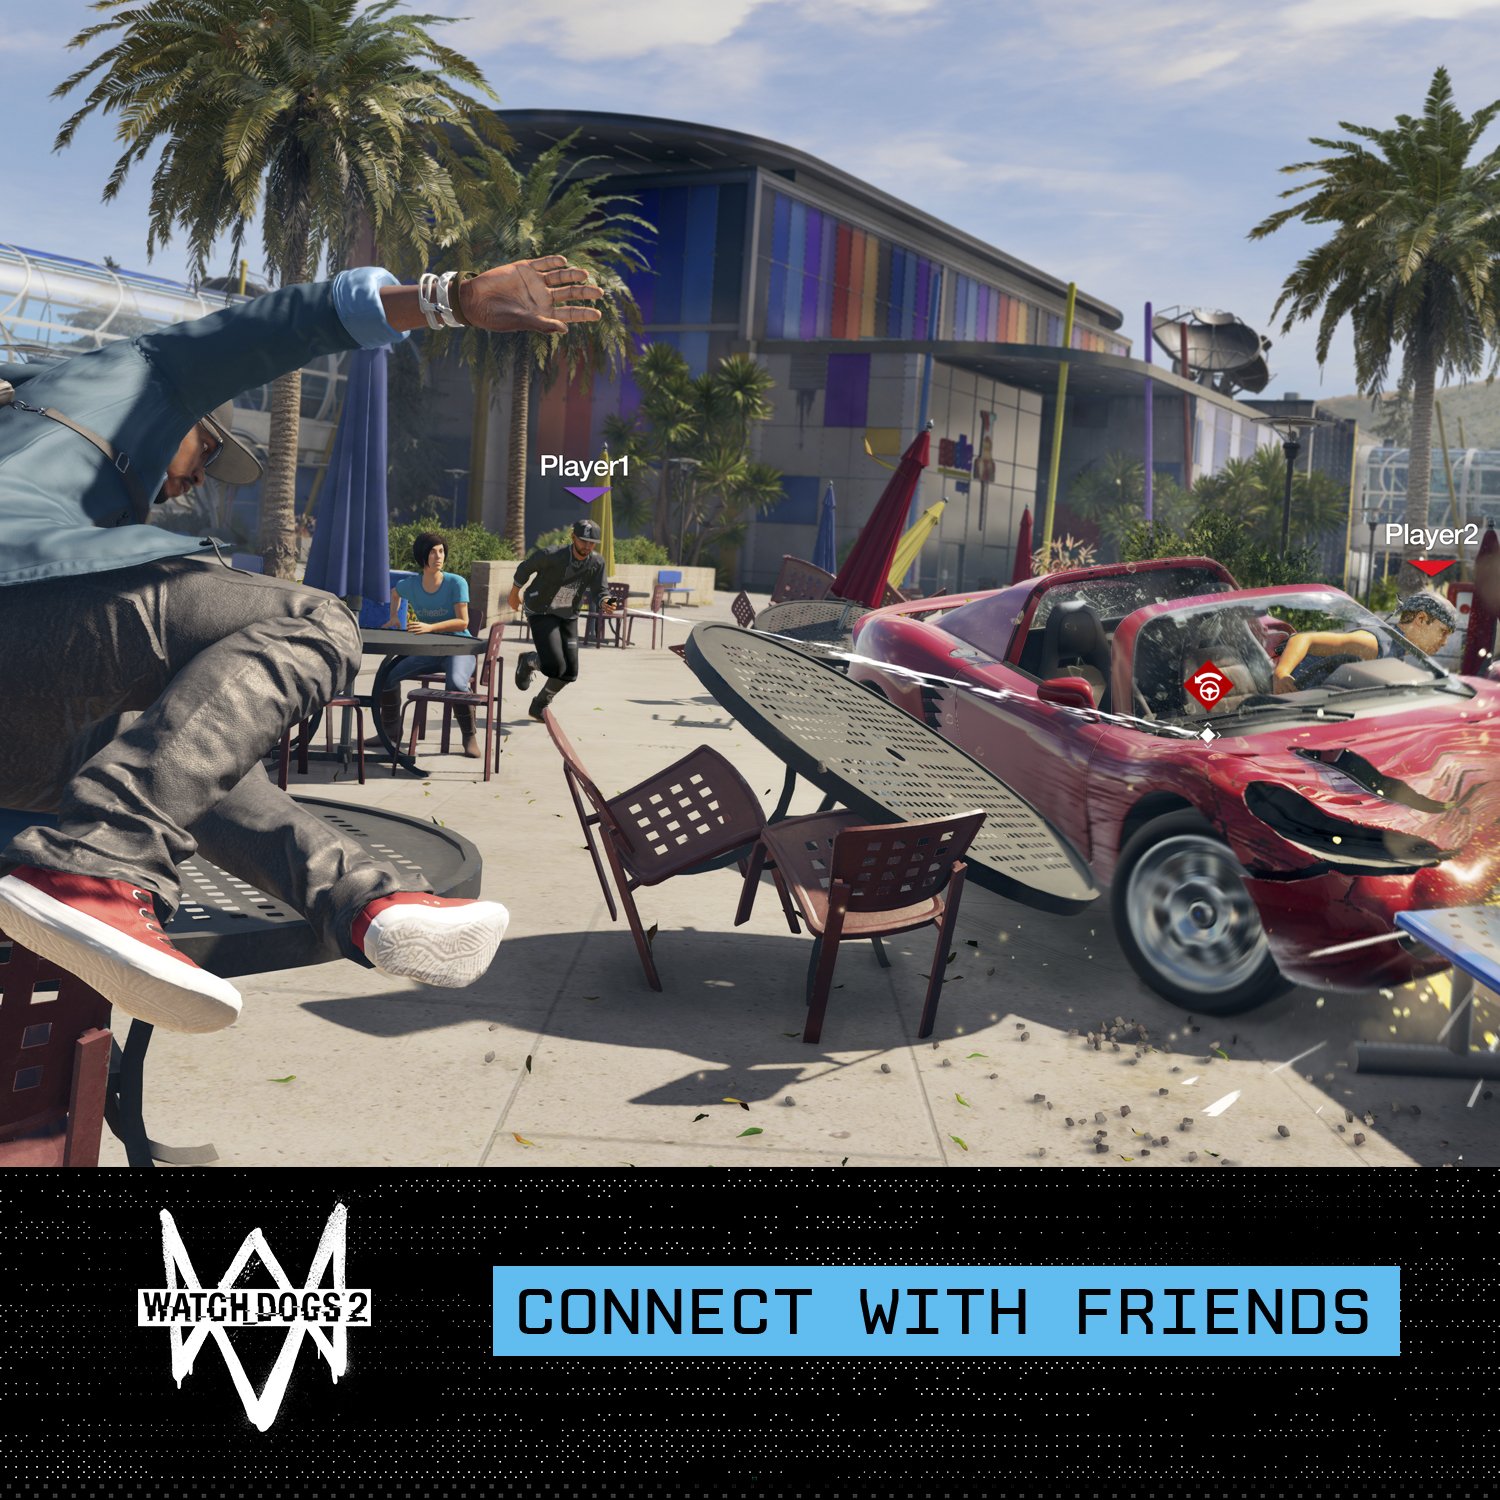 Watch Dogs 2: Deluxe Edition | PC Code - Ubisoft Connect